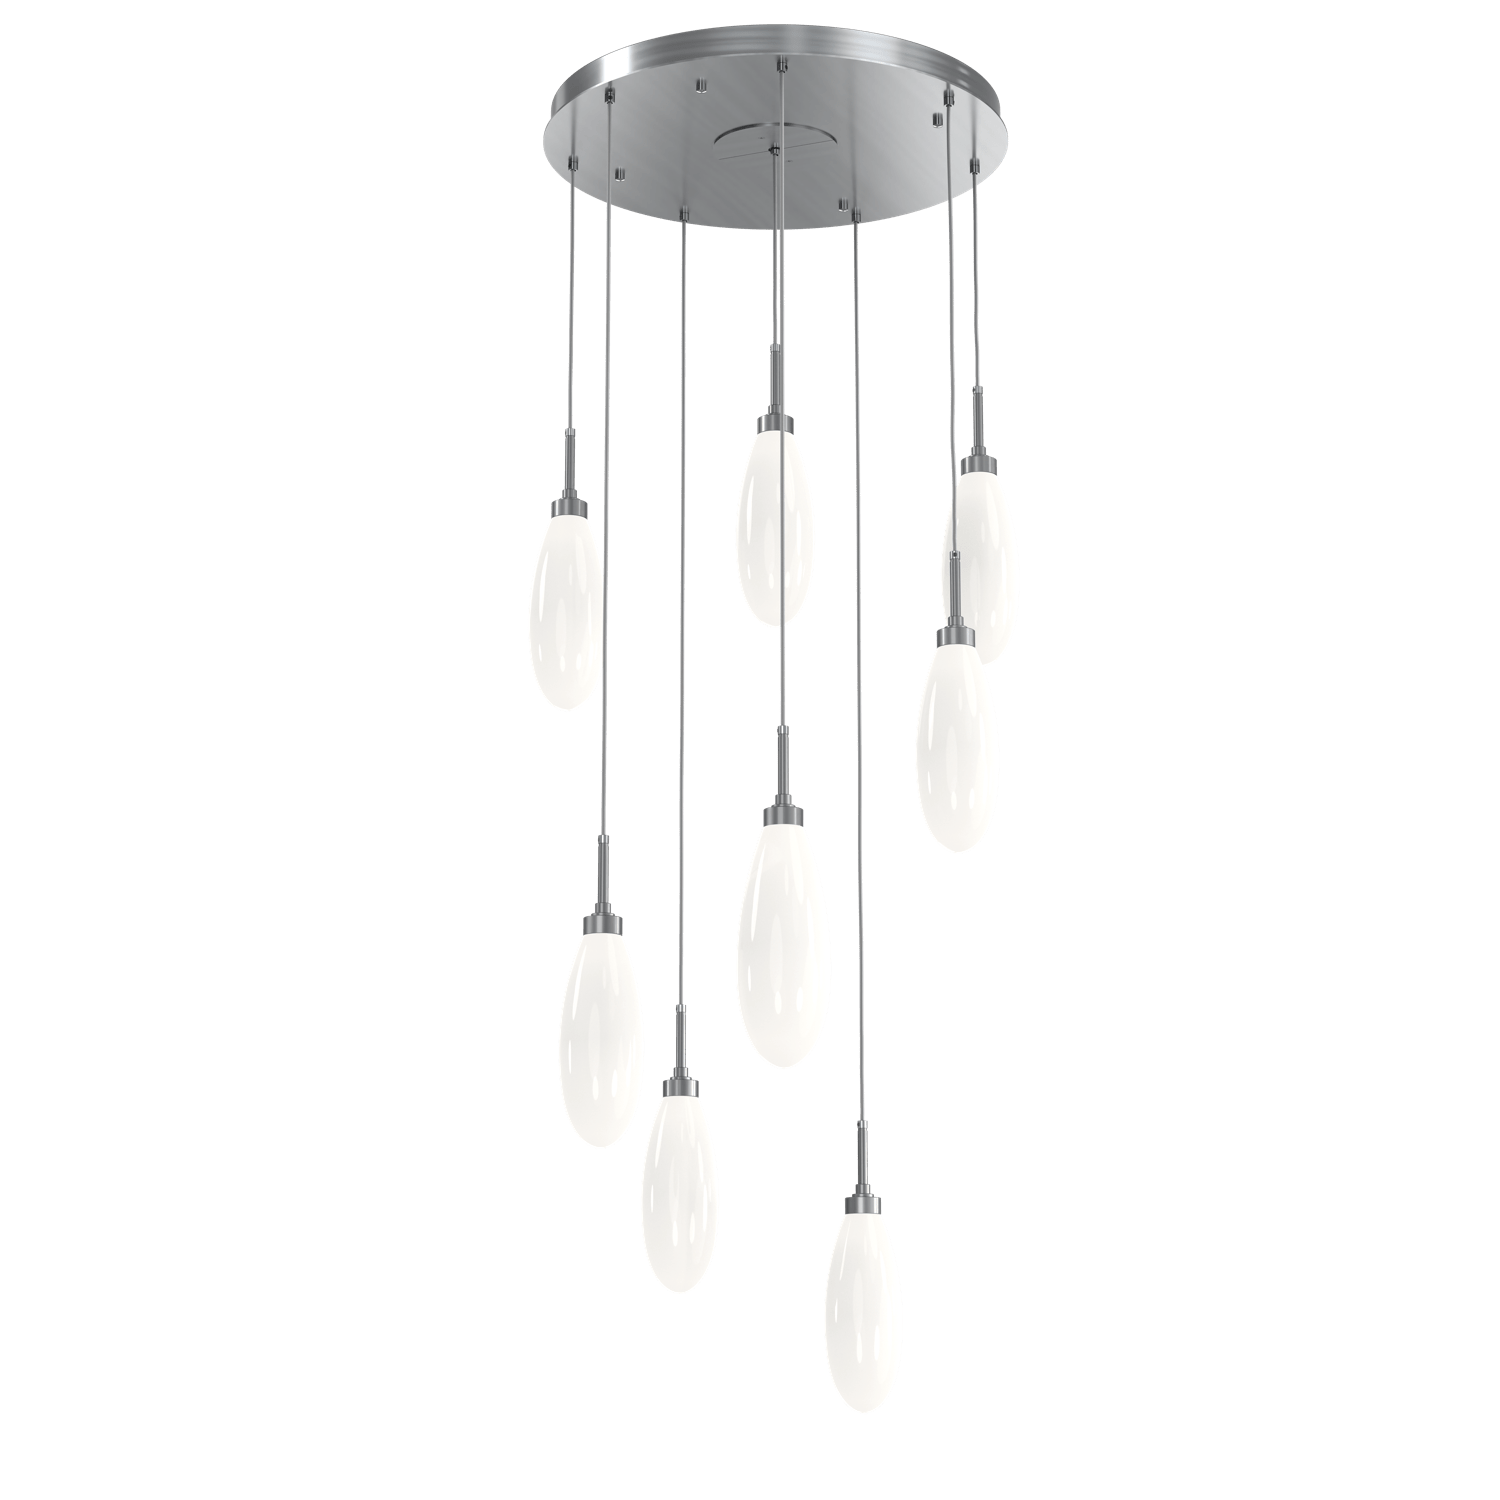 CHB0071-08-GM-WL-LL-Hammerton-Studio-Fiori-8-light-round-pendant-chandelier-with-gunmetal-finish-and-opal-white-glass-shades-and-LED-lamping